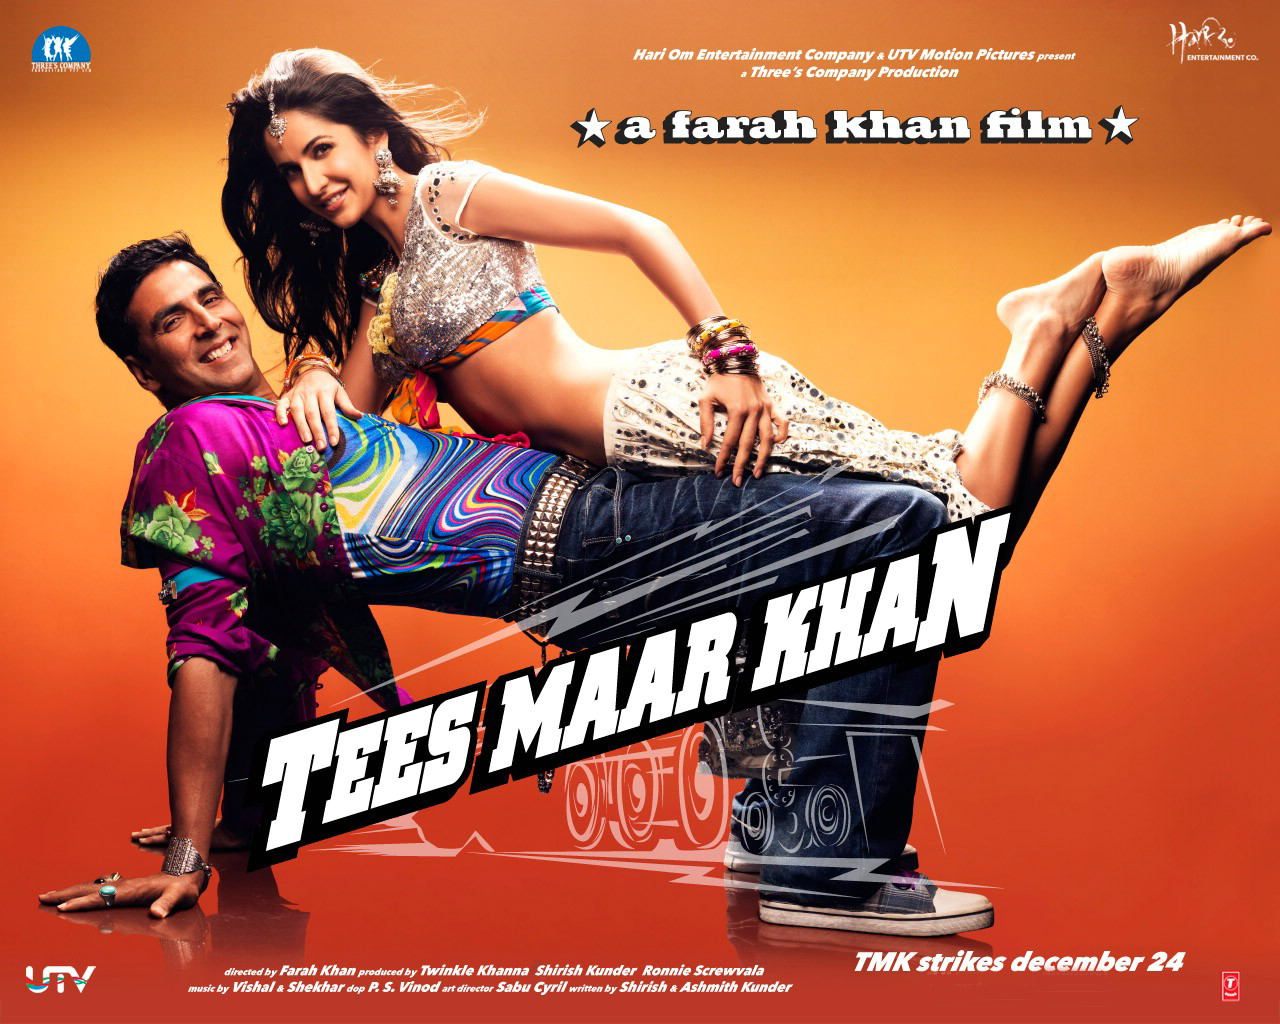 Free Movie Poster Download, Hindi Movie Picture, Film 